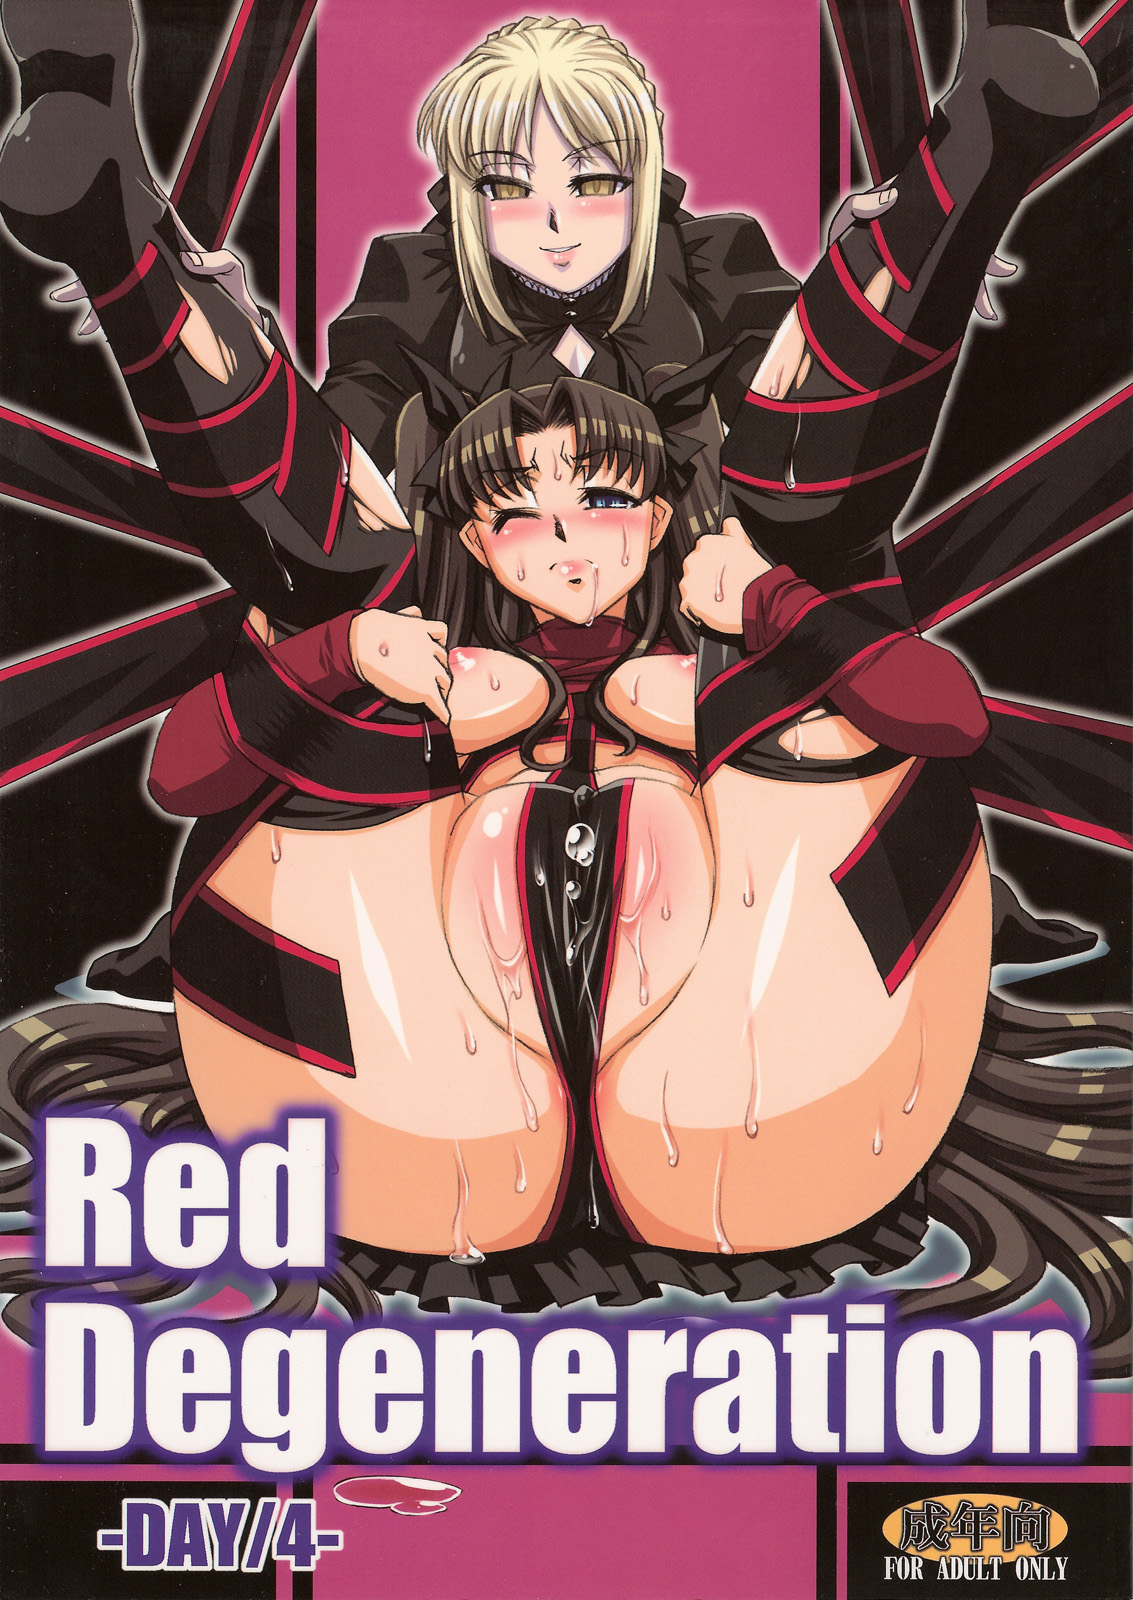 [H.B(B-RIVER)] Red Degeneration DAY4 (Fate stay night) 